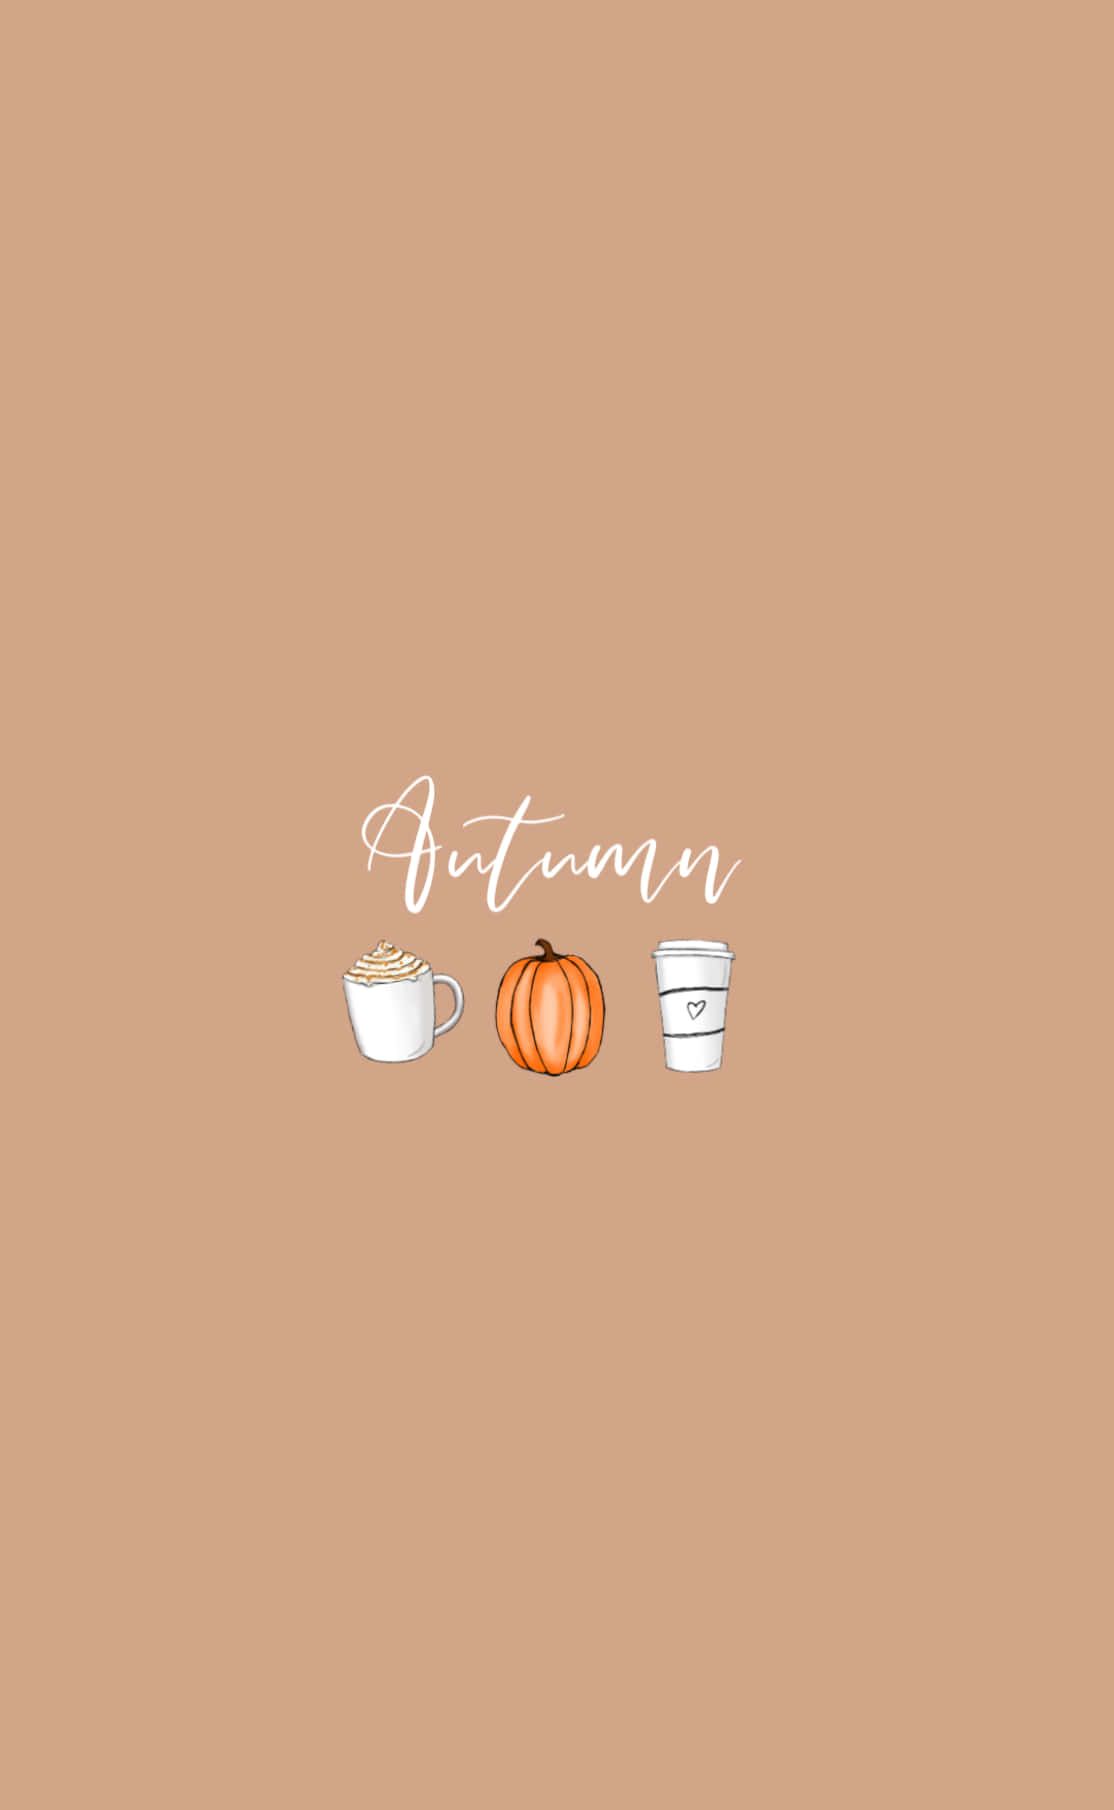 The fall wallpaper with a pumpkin, coffee and tea - October